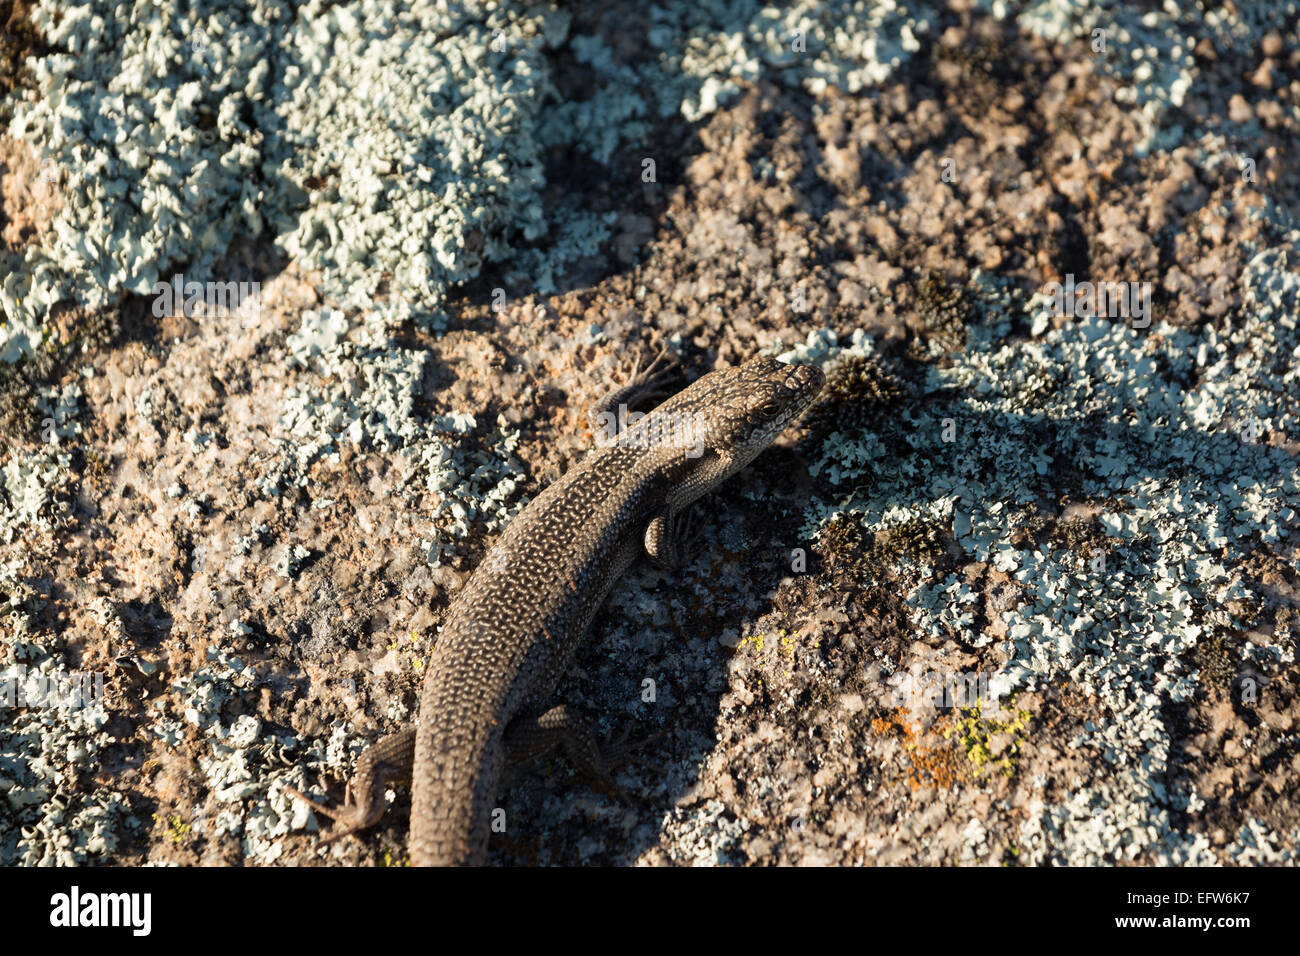 A photograph of a tree skink (tree-crevice skink) on a granite boulder in central western NSW, Australia. Stock Photo